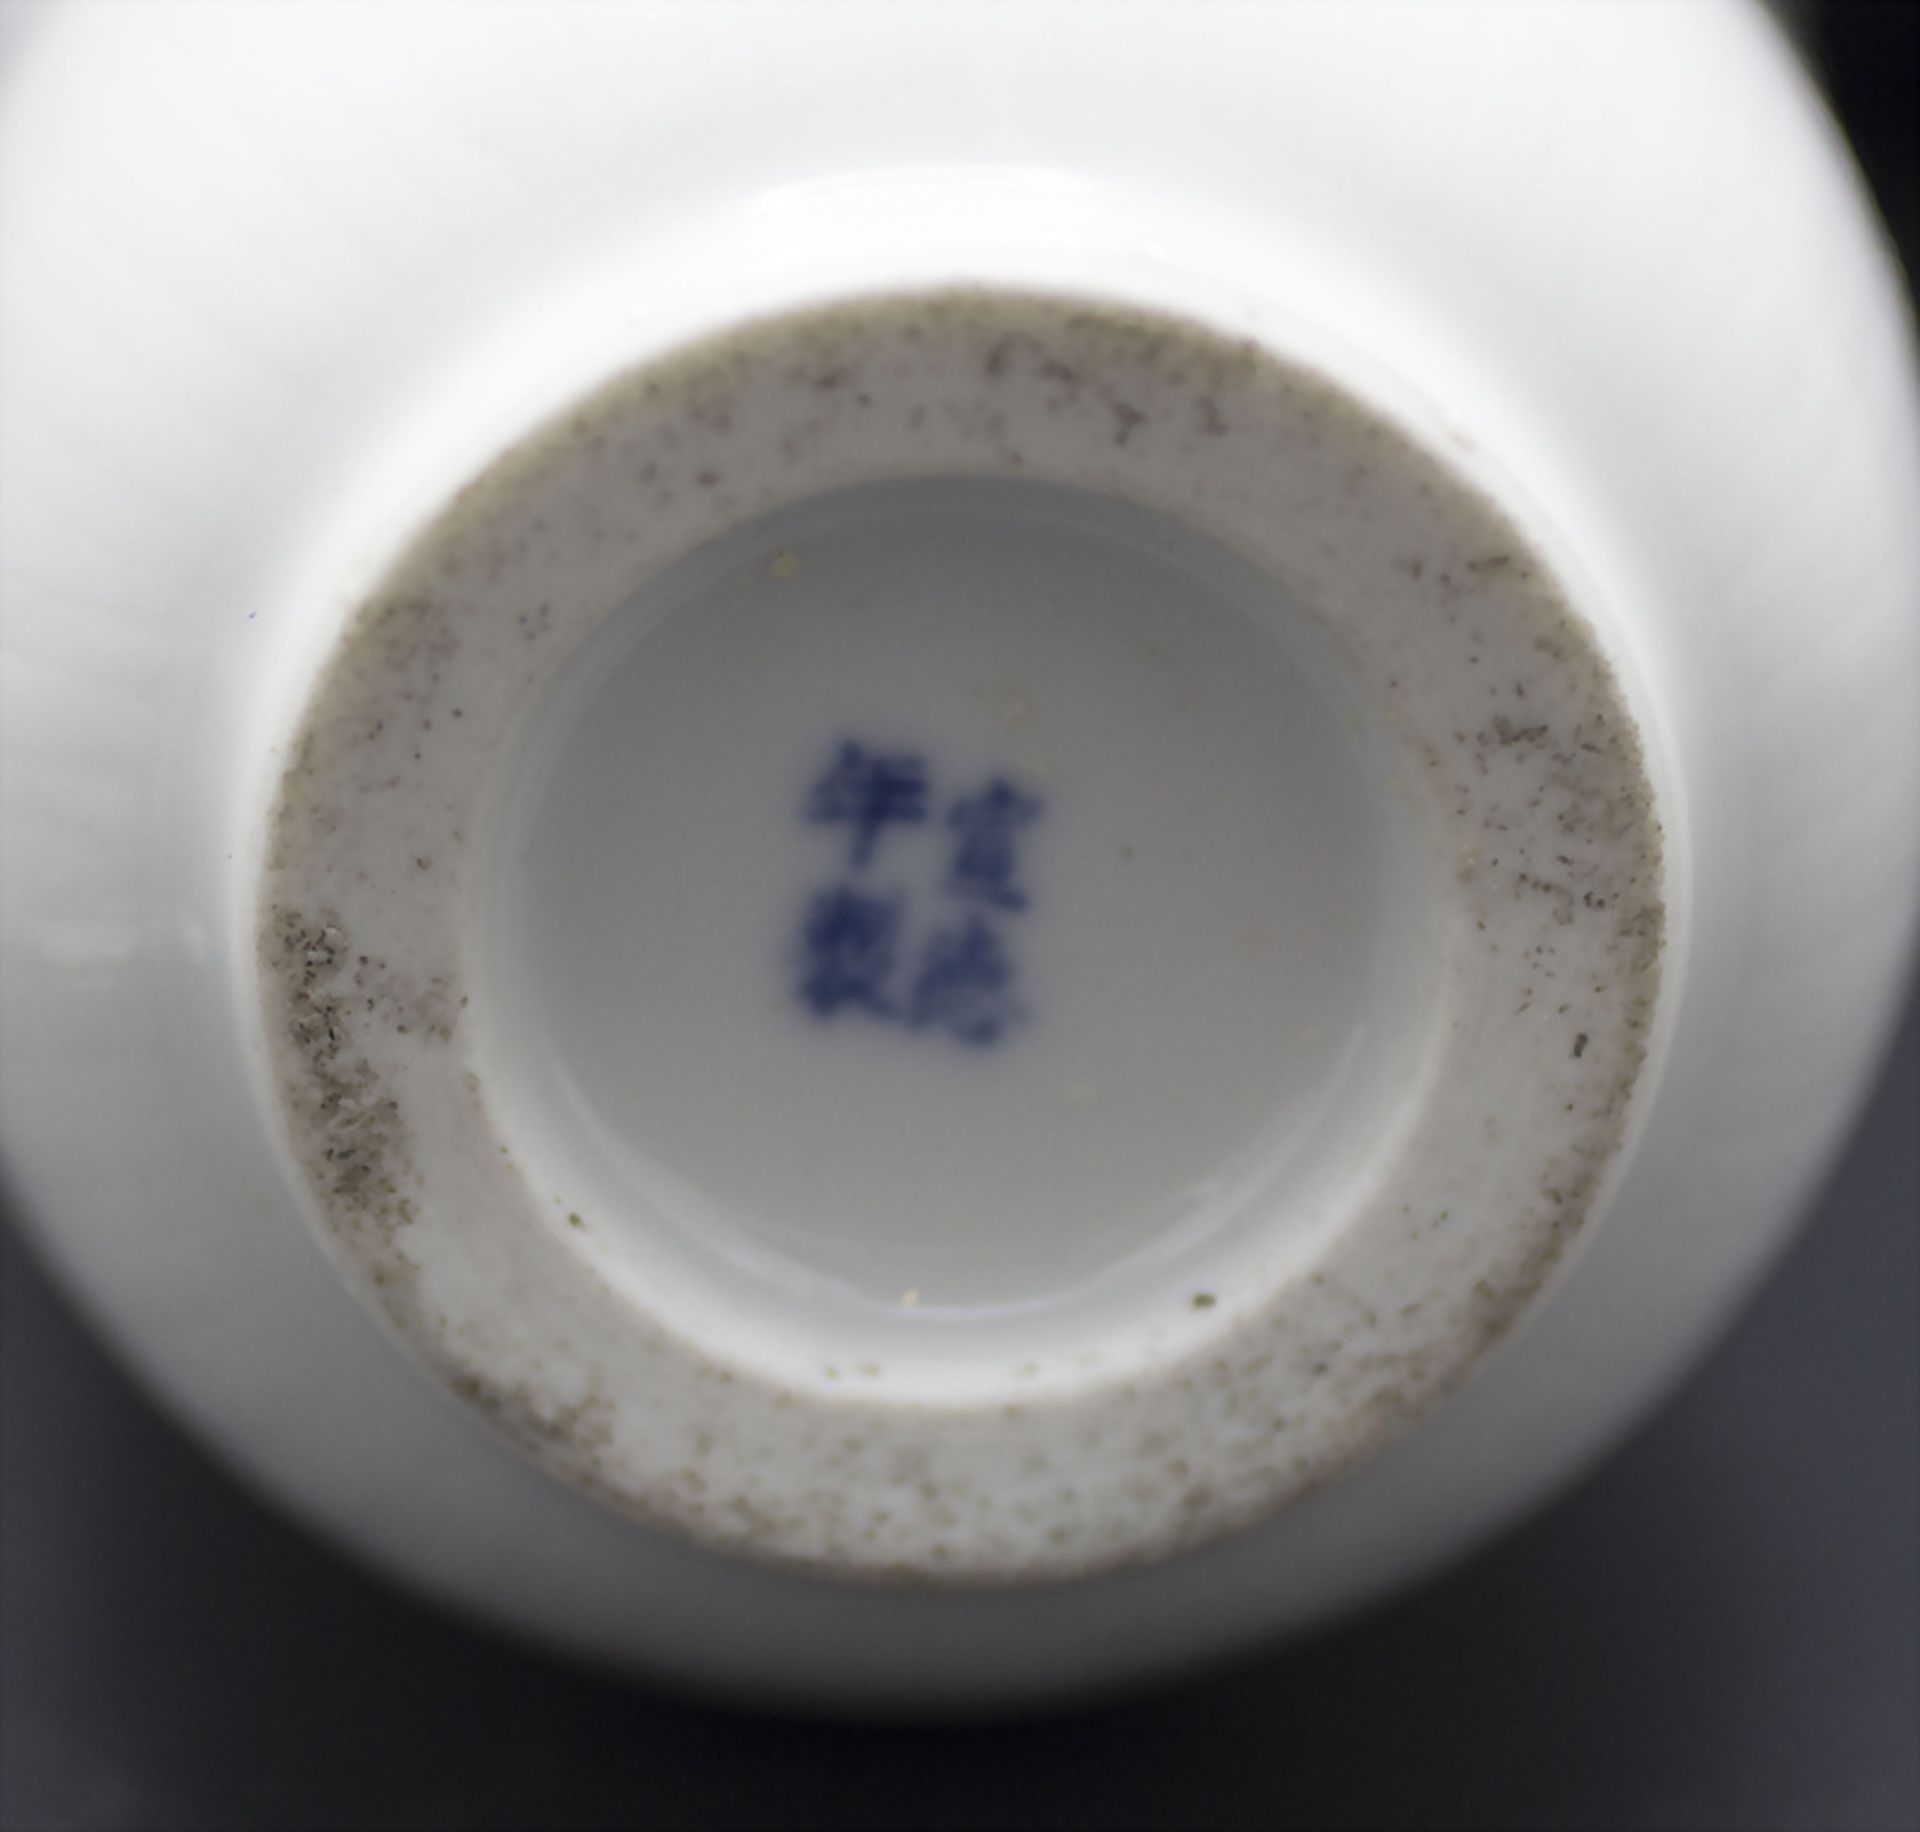 Pinselbecher / A brush cup, China, Qing Dynastie (1644-1911), Chia Ch'ing-Periode (1796-1820) - Image 3 of 3